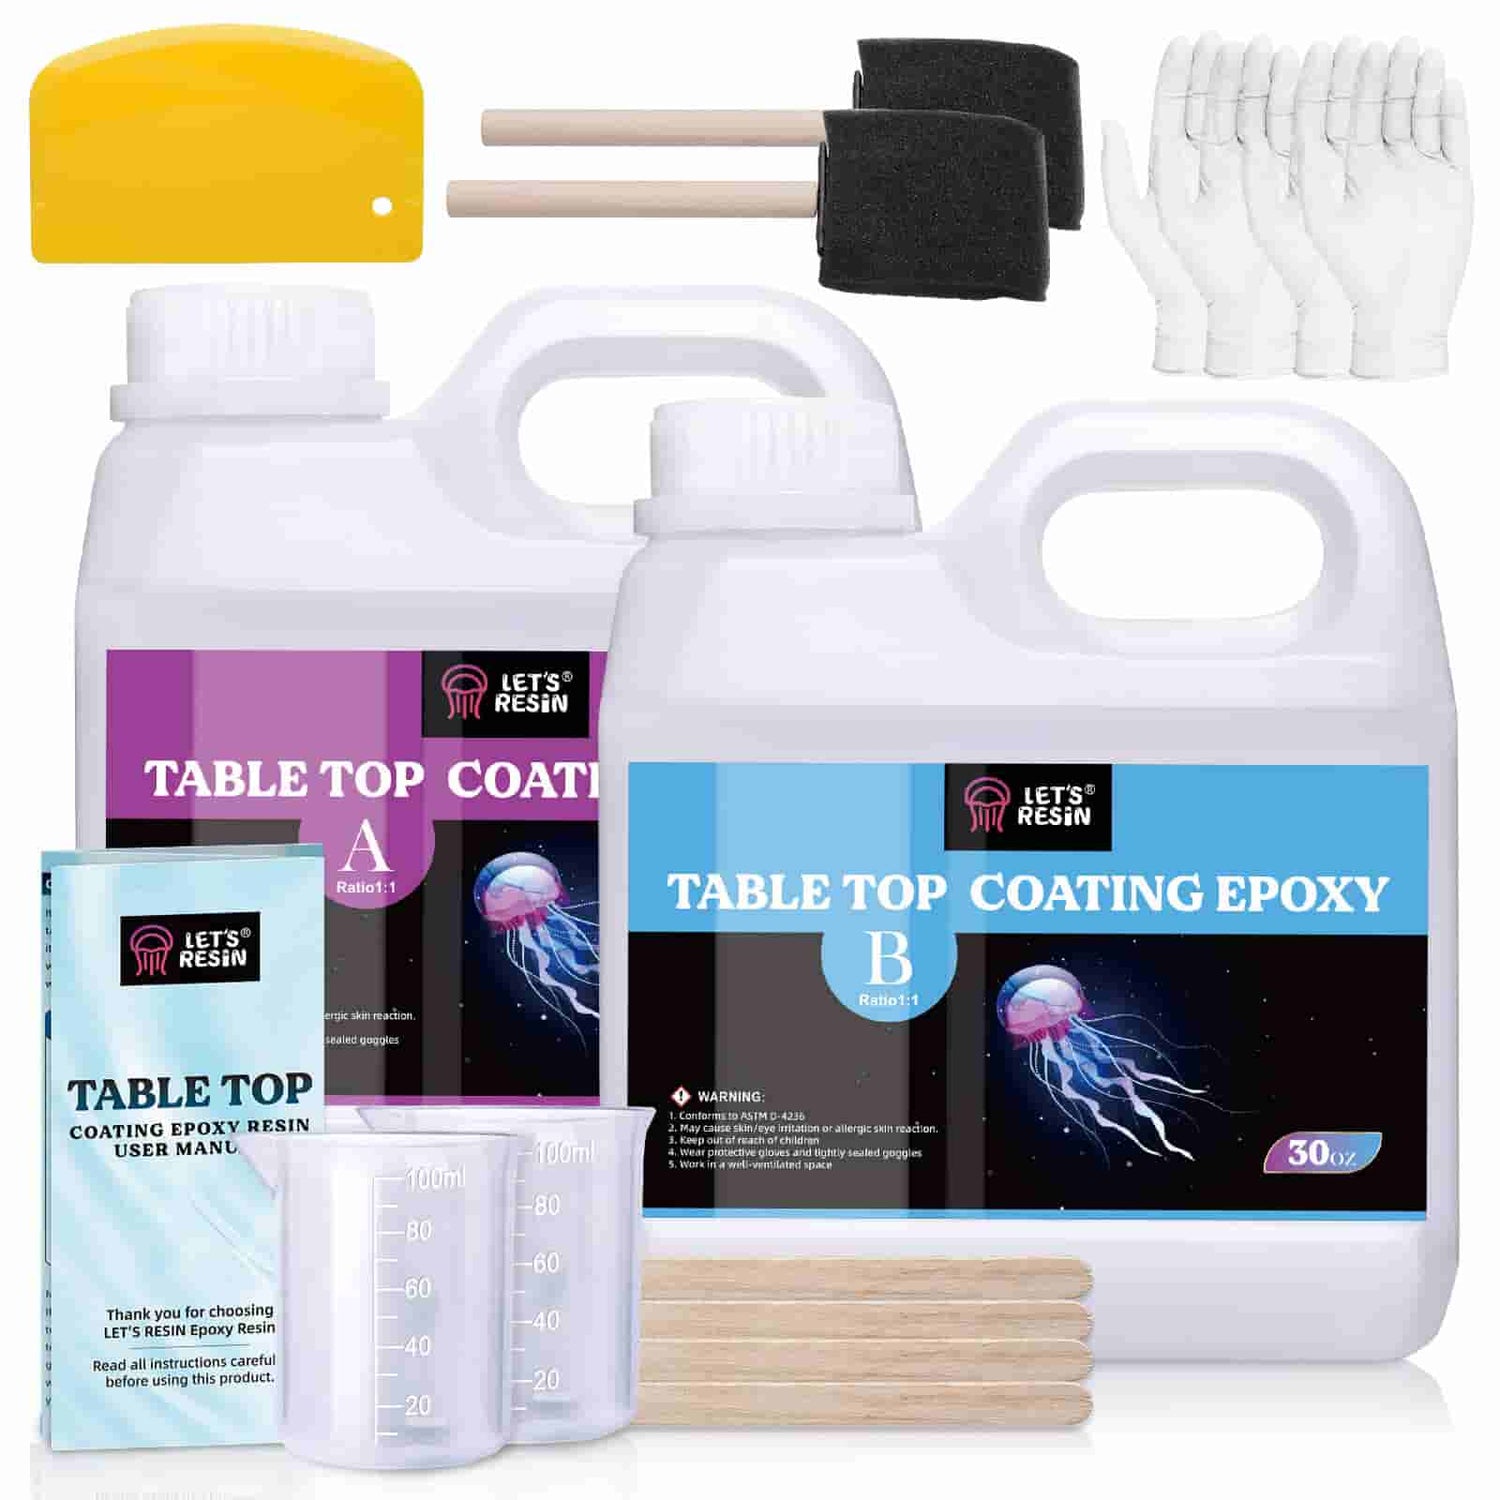 LET'S RESIN Epoxy Resin 2 Gallon Kit, Crystal Clear Coating & Casting Epoxy  Resin for Table Top, Countertop, River Table, Wood, Jewelry Making, Resin  Art